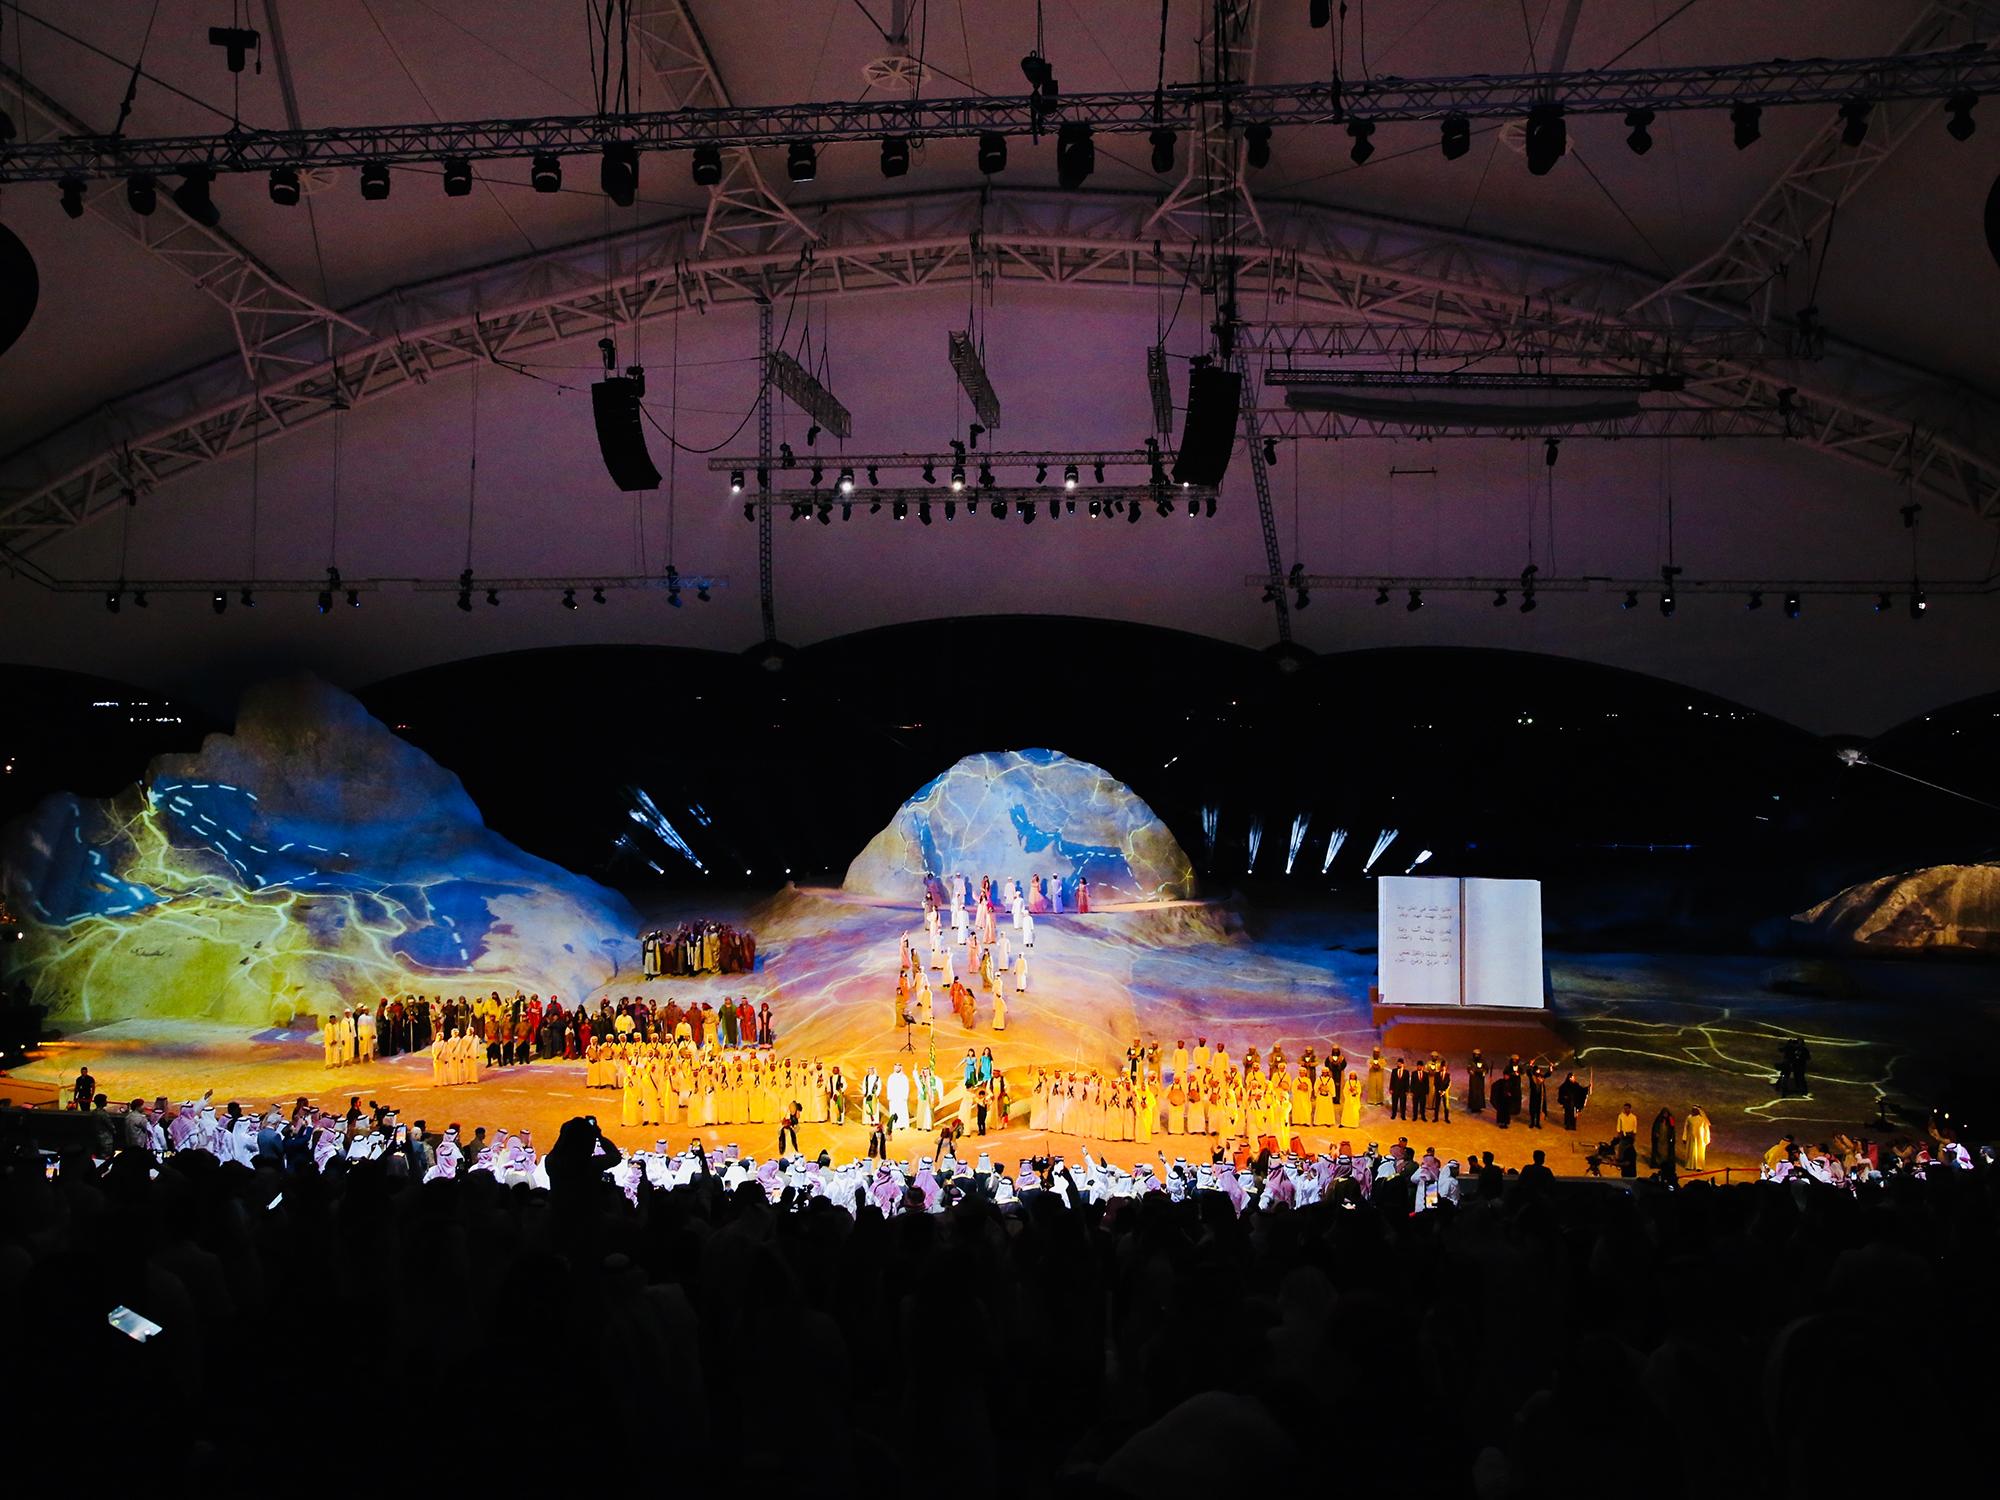 A wide shot of the large stage with projection mapping and large physical stage design.